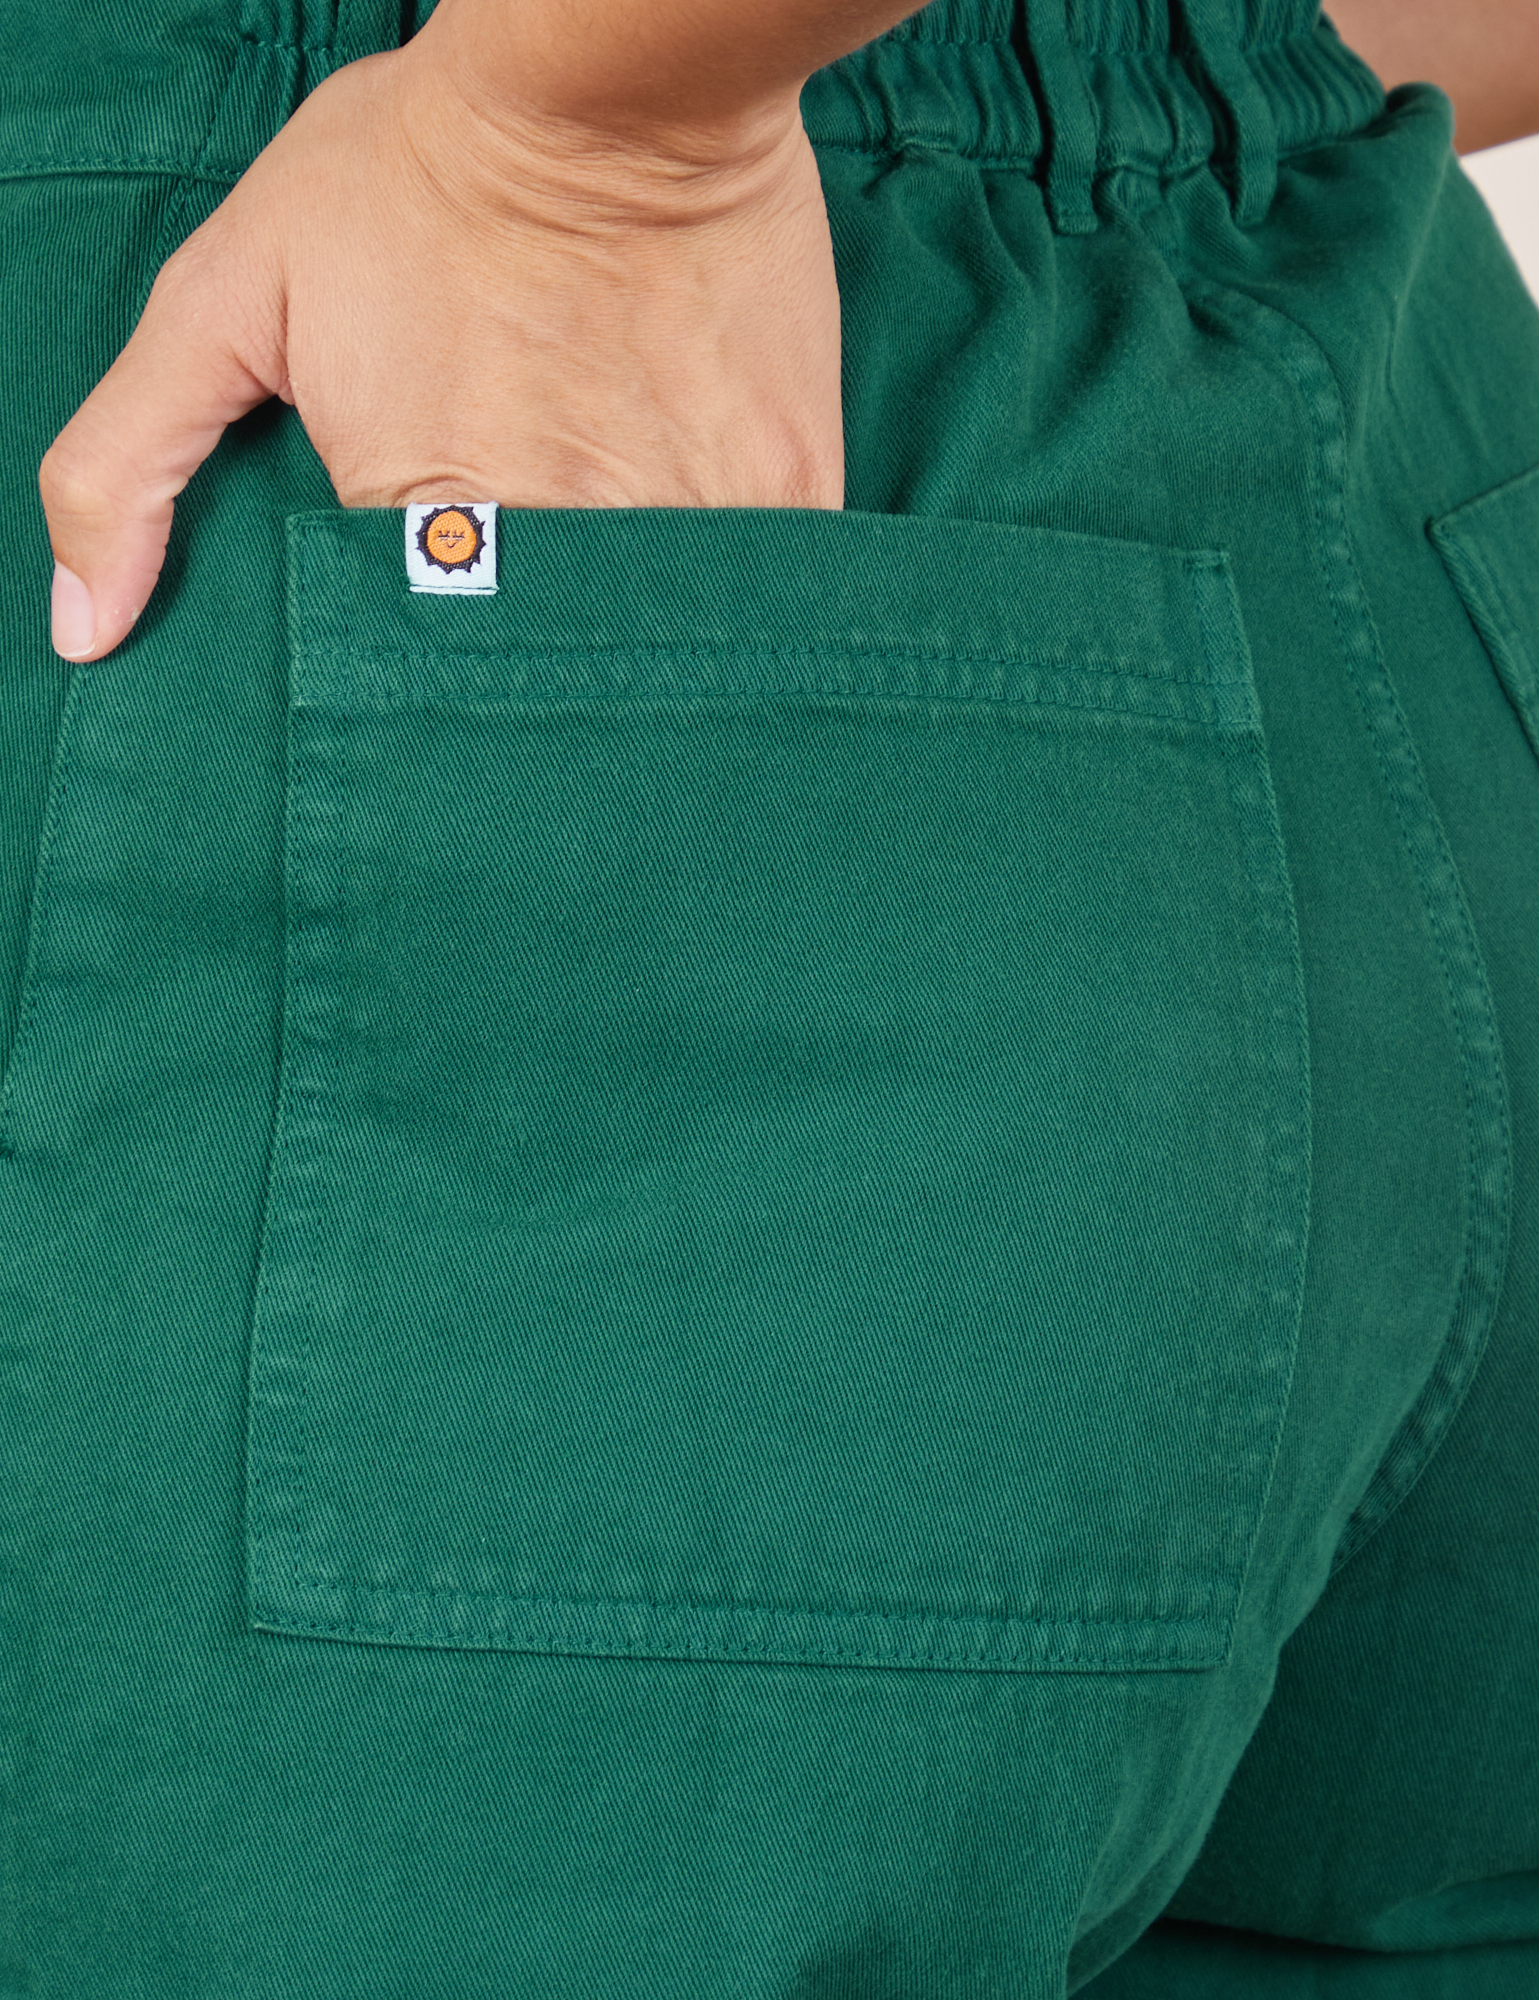 Back pocket close up of Short Sleeve Jumpsuit in Hunter Green. Tiara has her hand in the pocket.